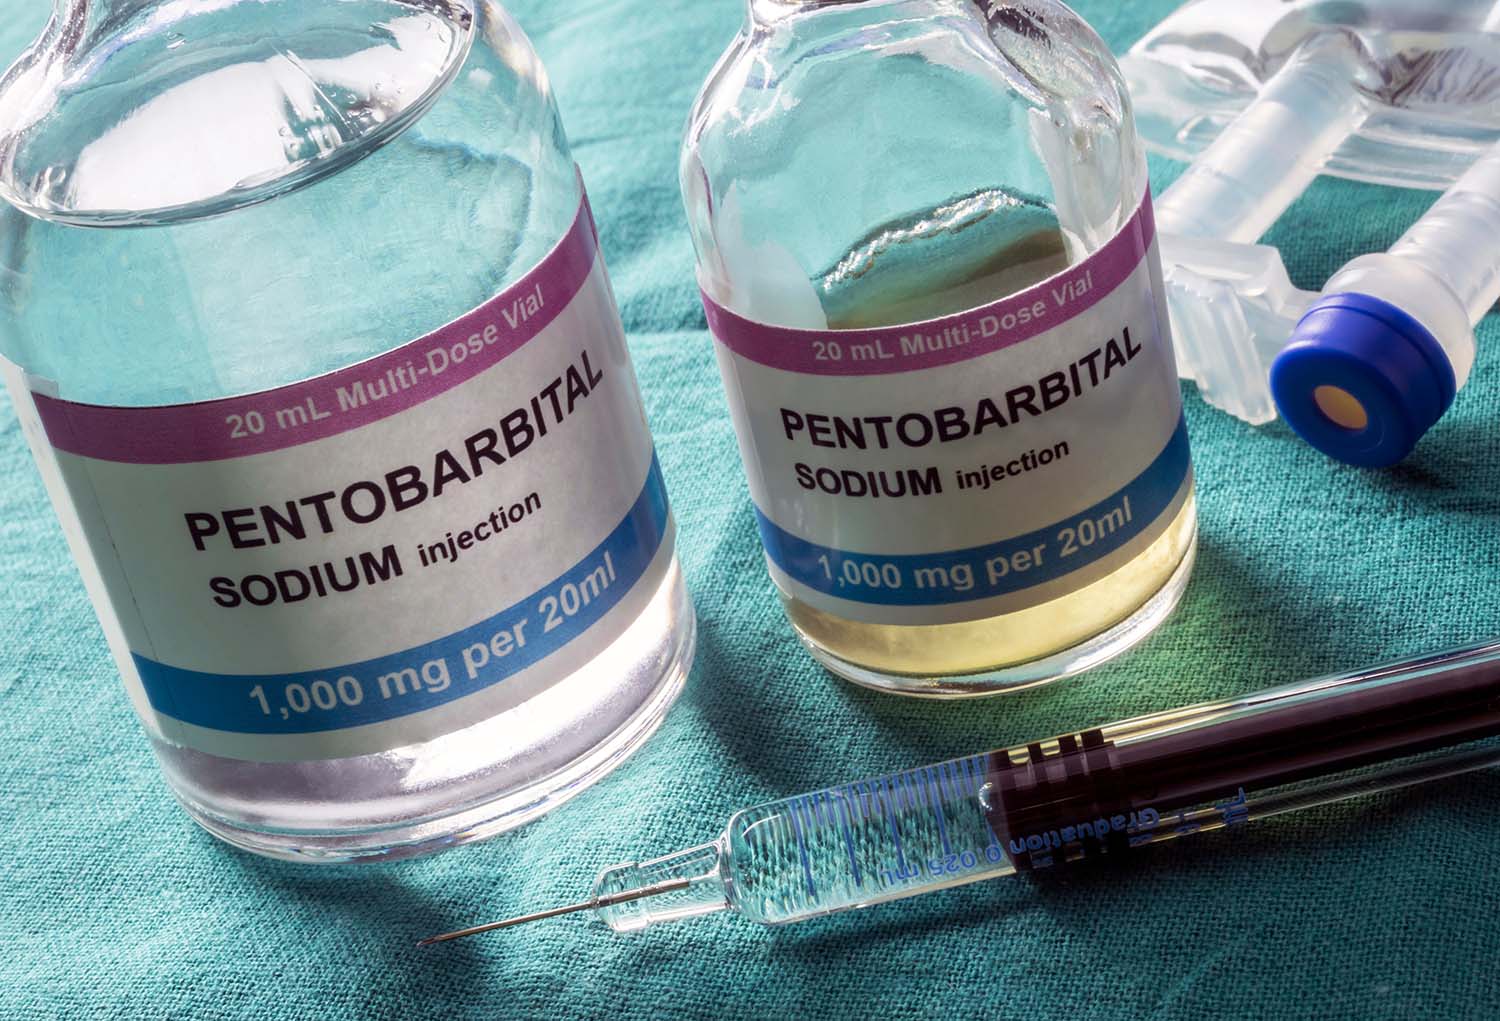 Vials with Sodium pentobarbital used for euthanasia and lethal inyecion in a hospital, conceptual image